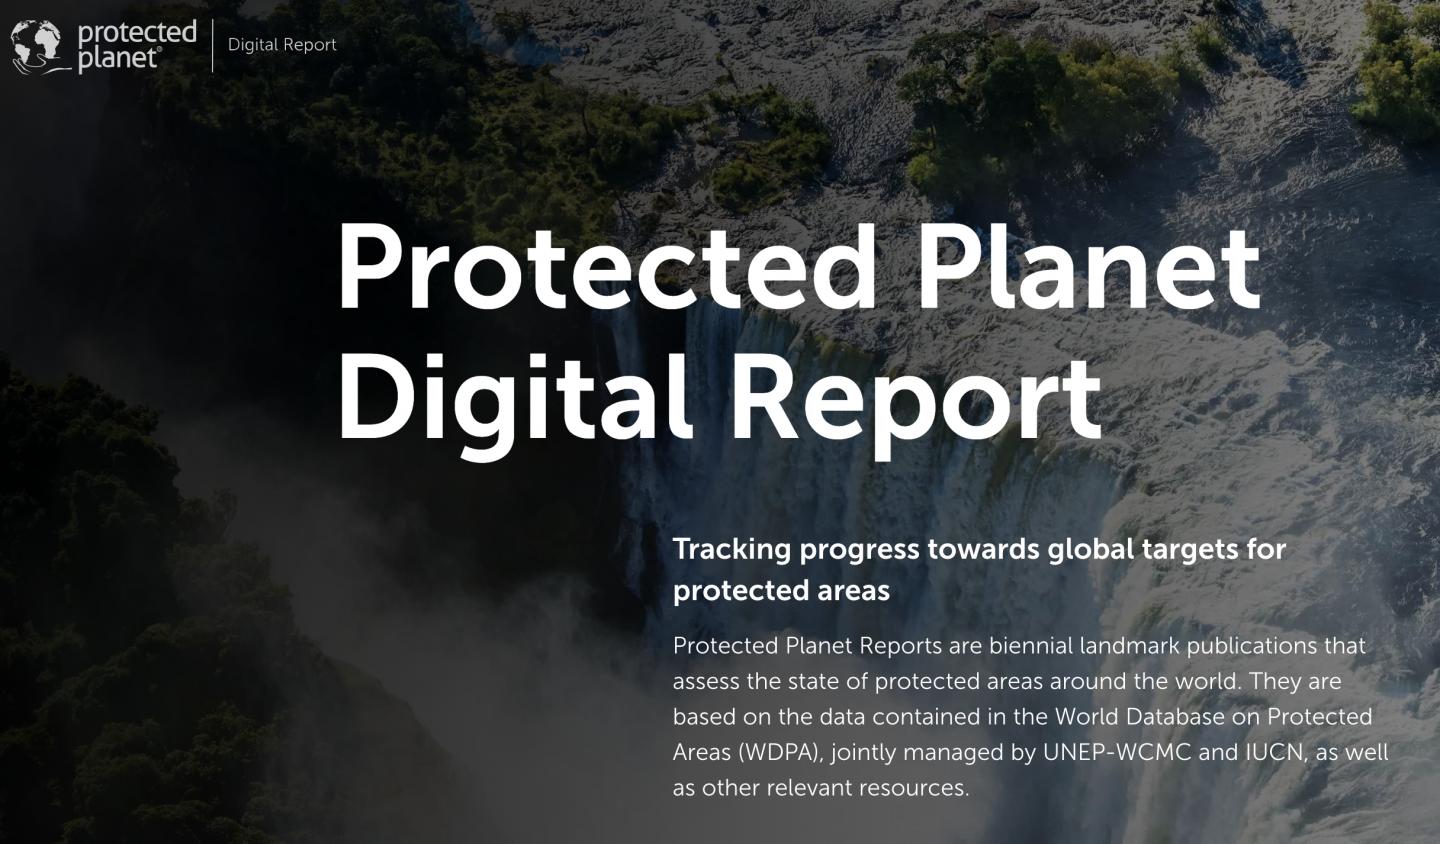 Protected Planet Report